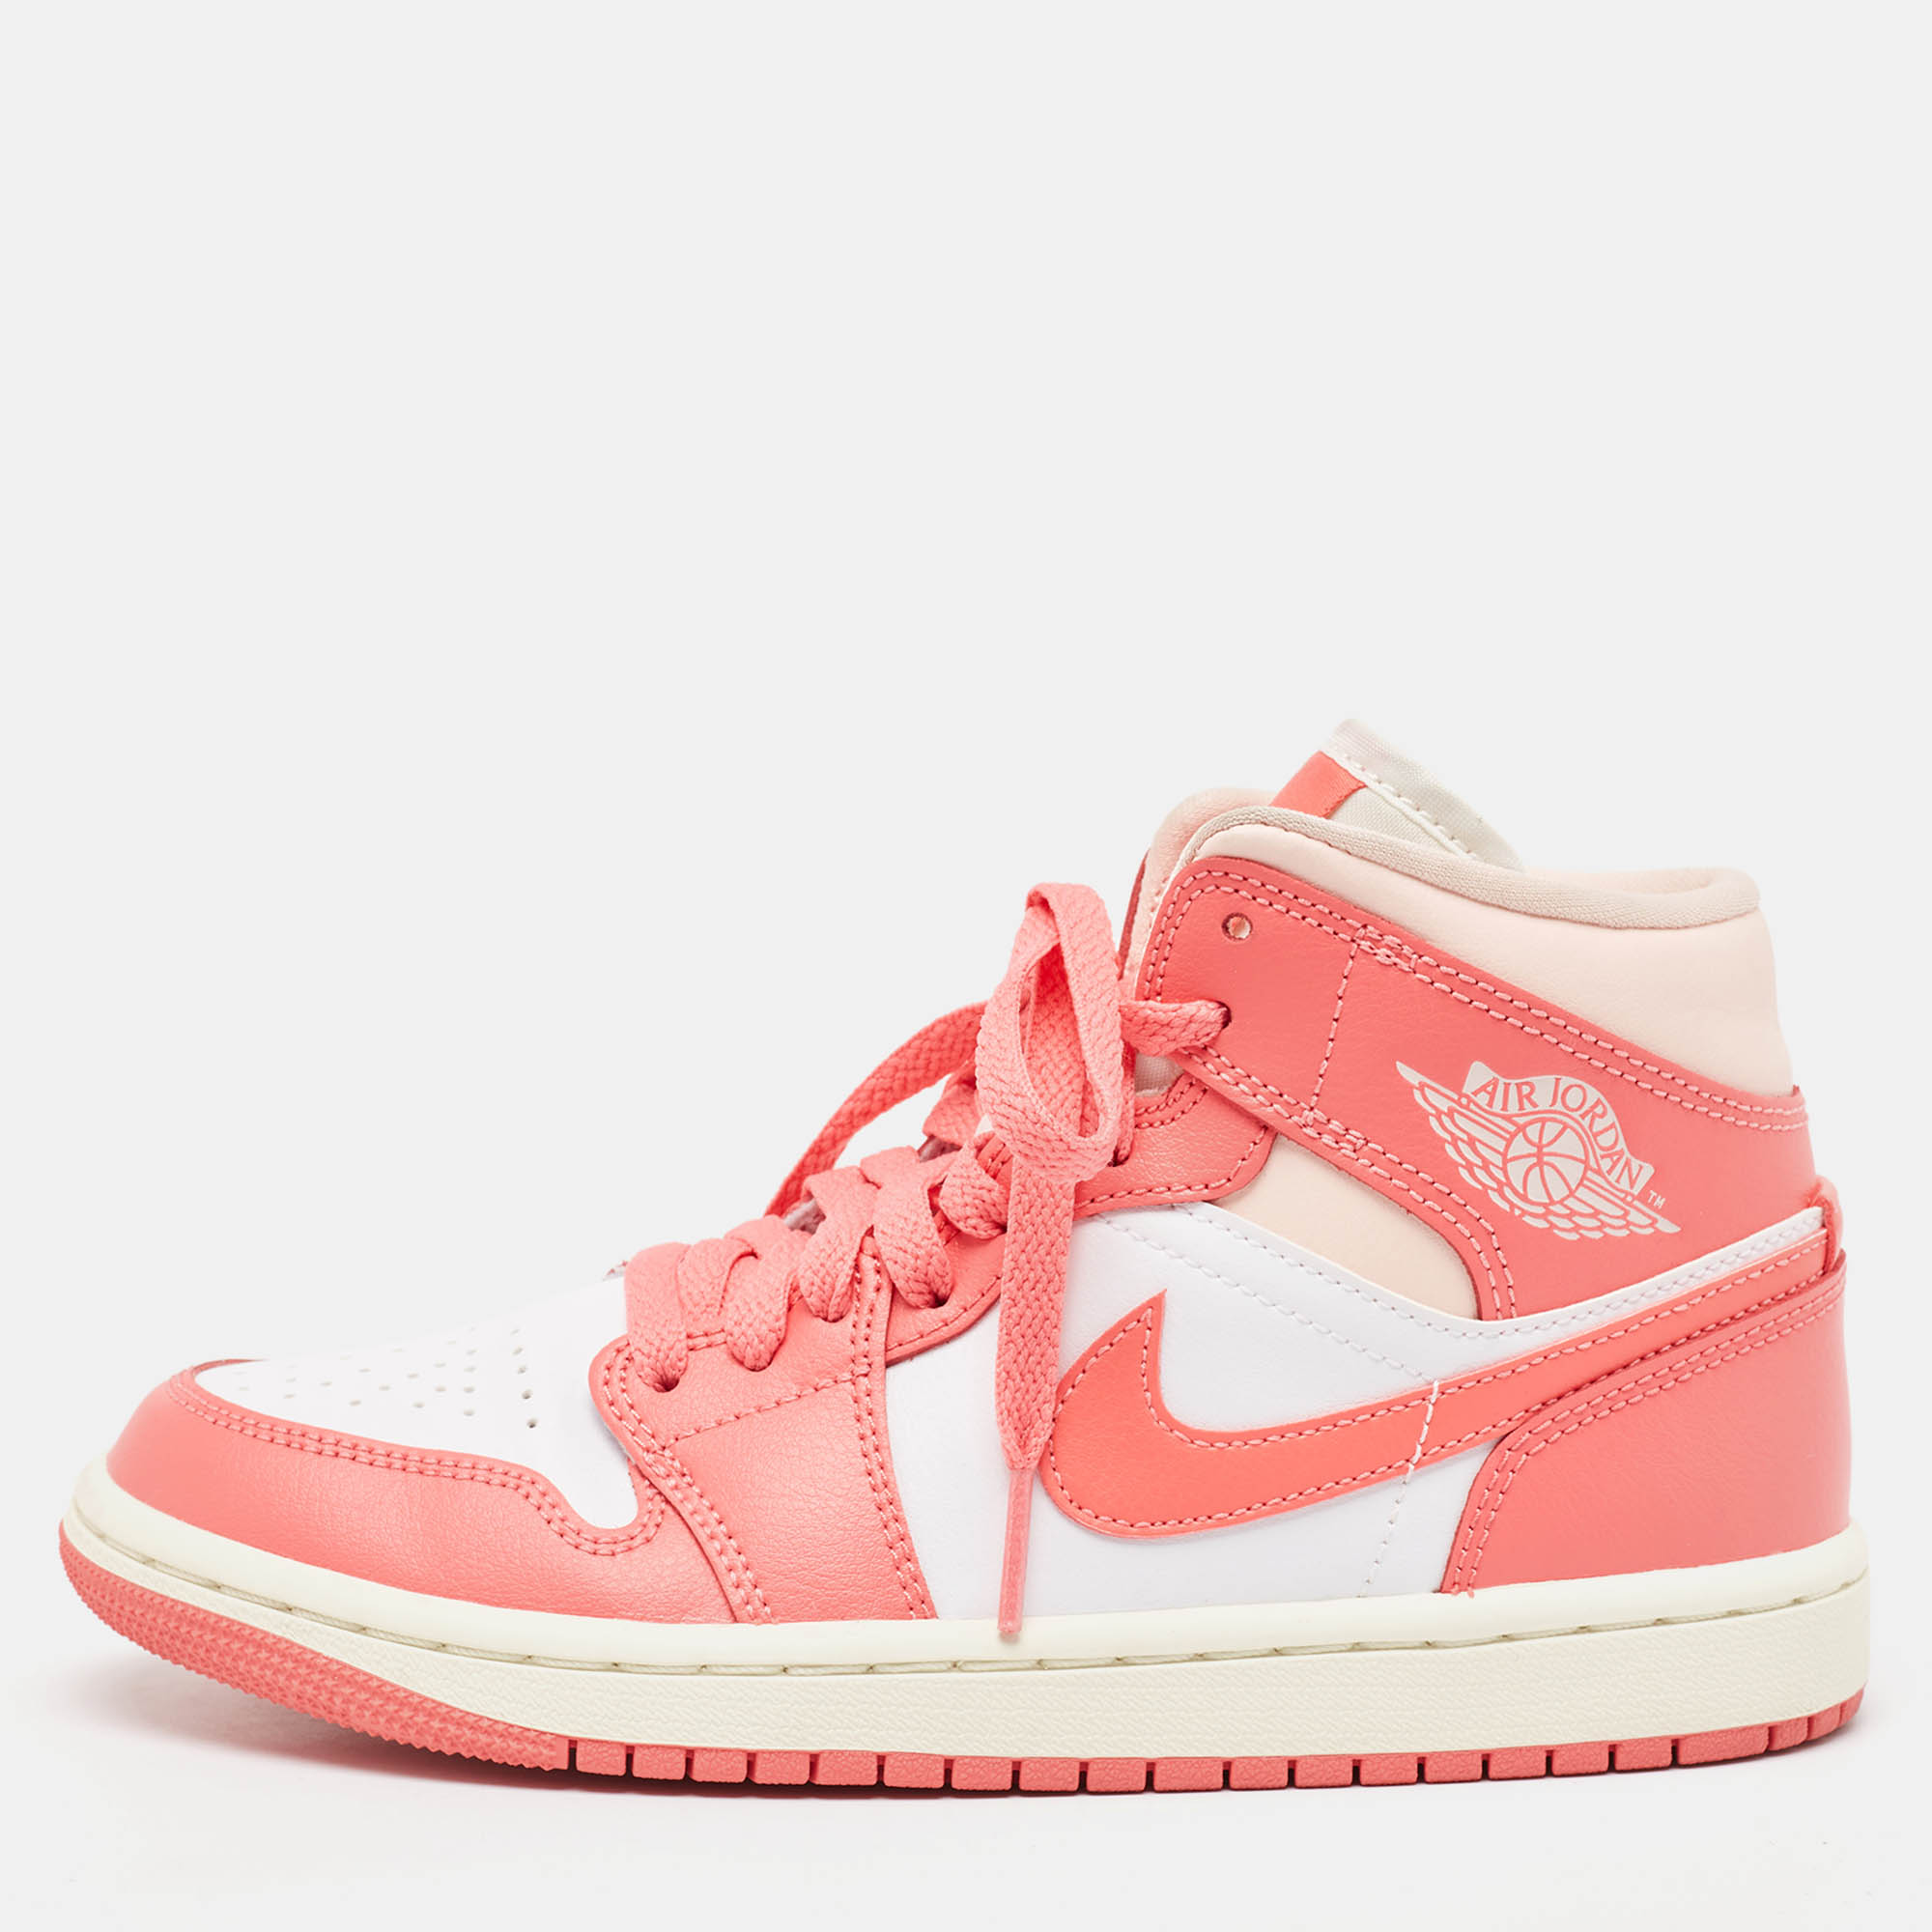 

Air Jordans Pink/White Leather Jordan 1 Mid Strawberries and Cream Sneakers Size 36